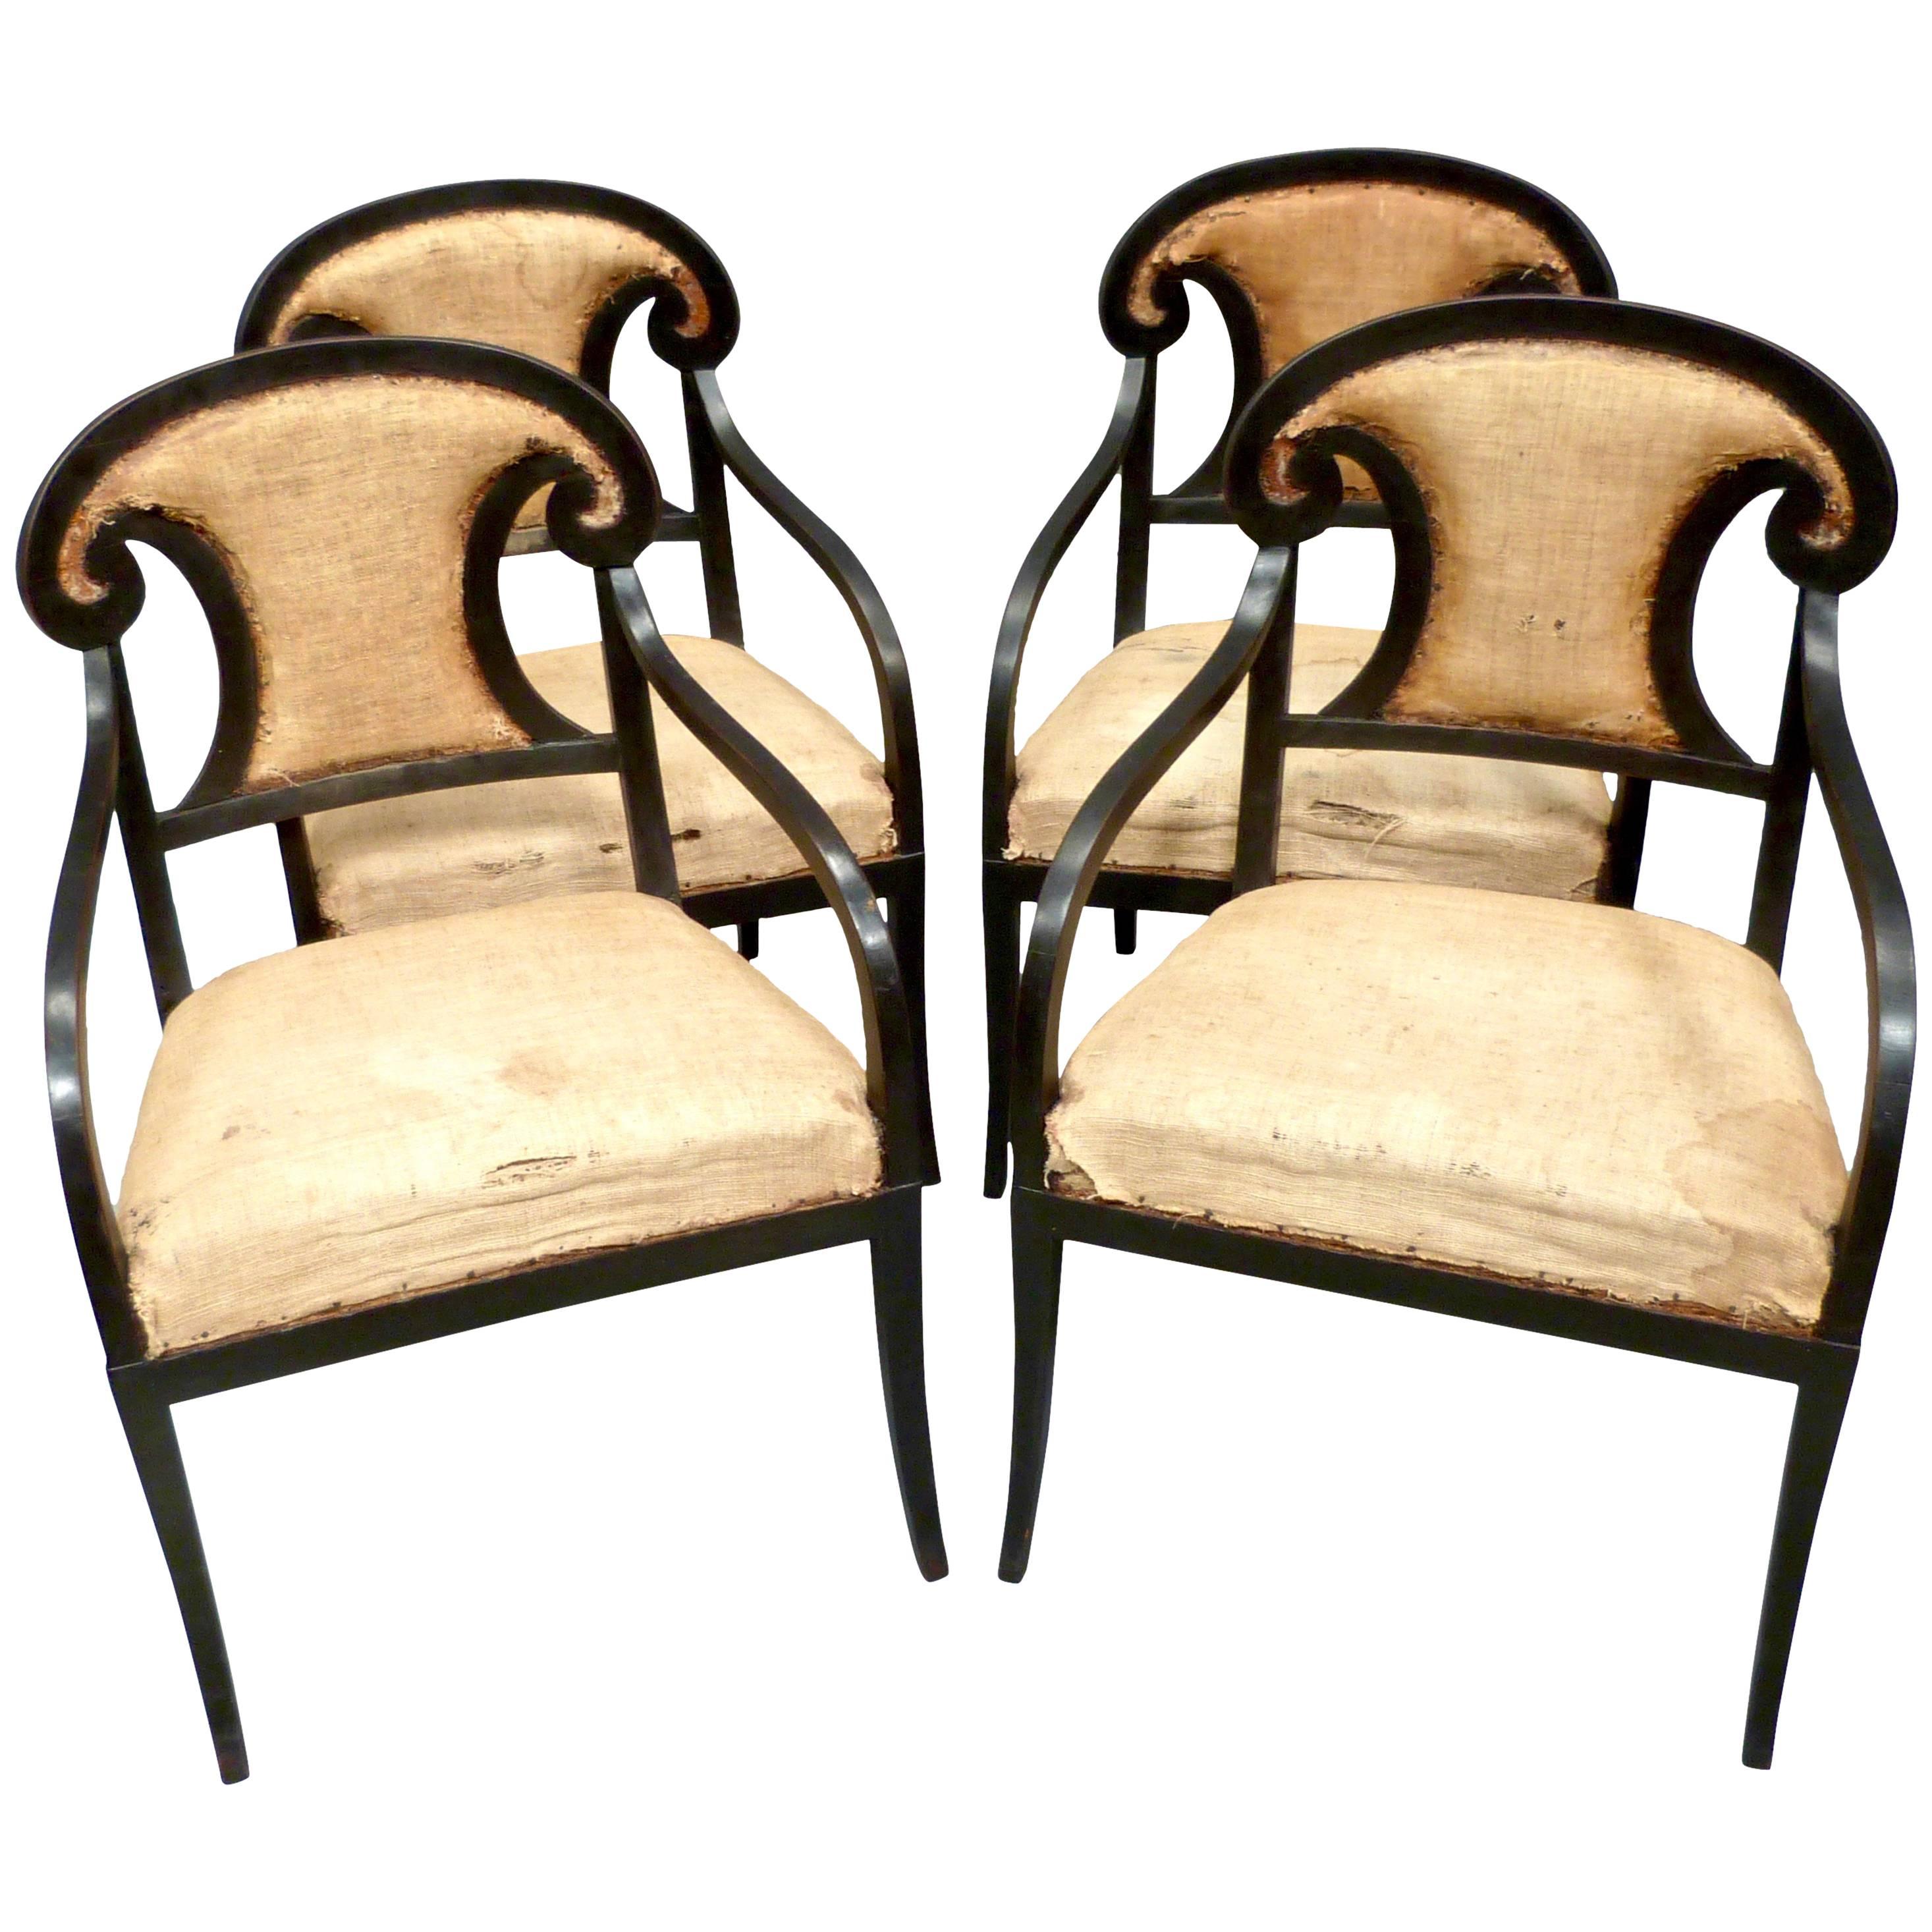 Set of Four Late 19th Century Swedish Biedermeier Chairs For Sale